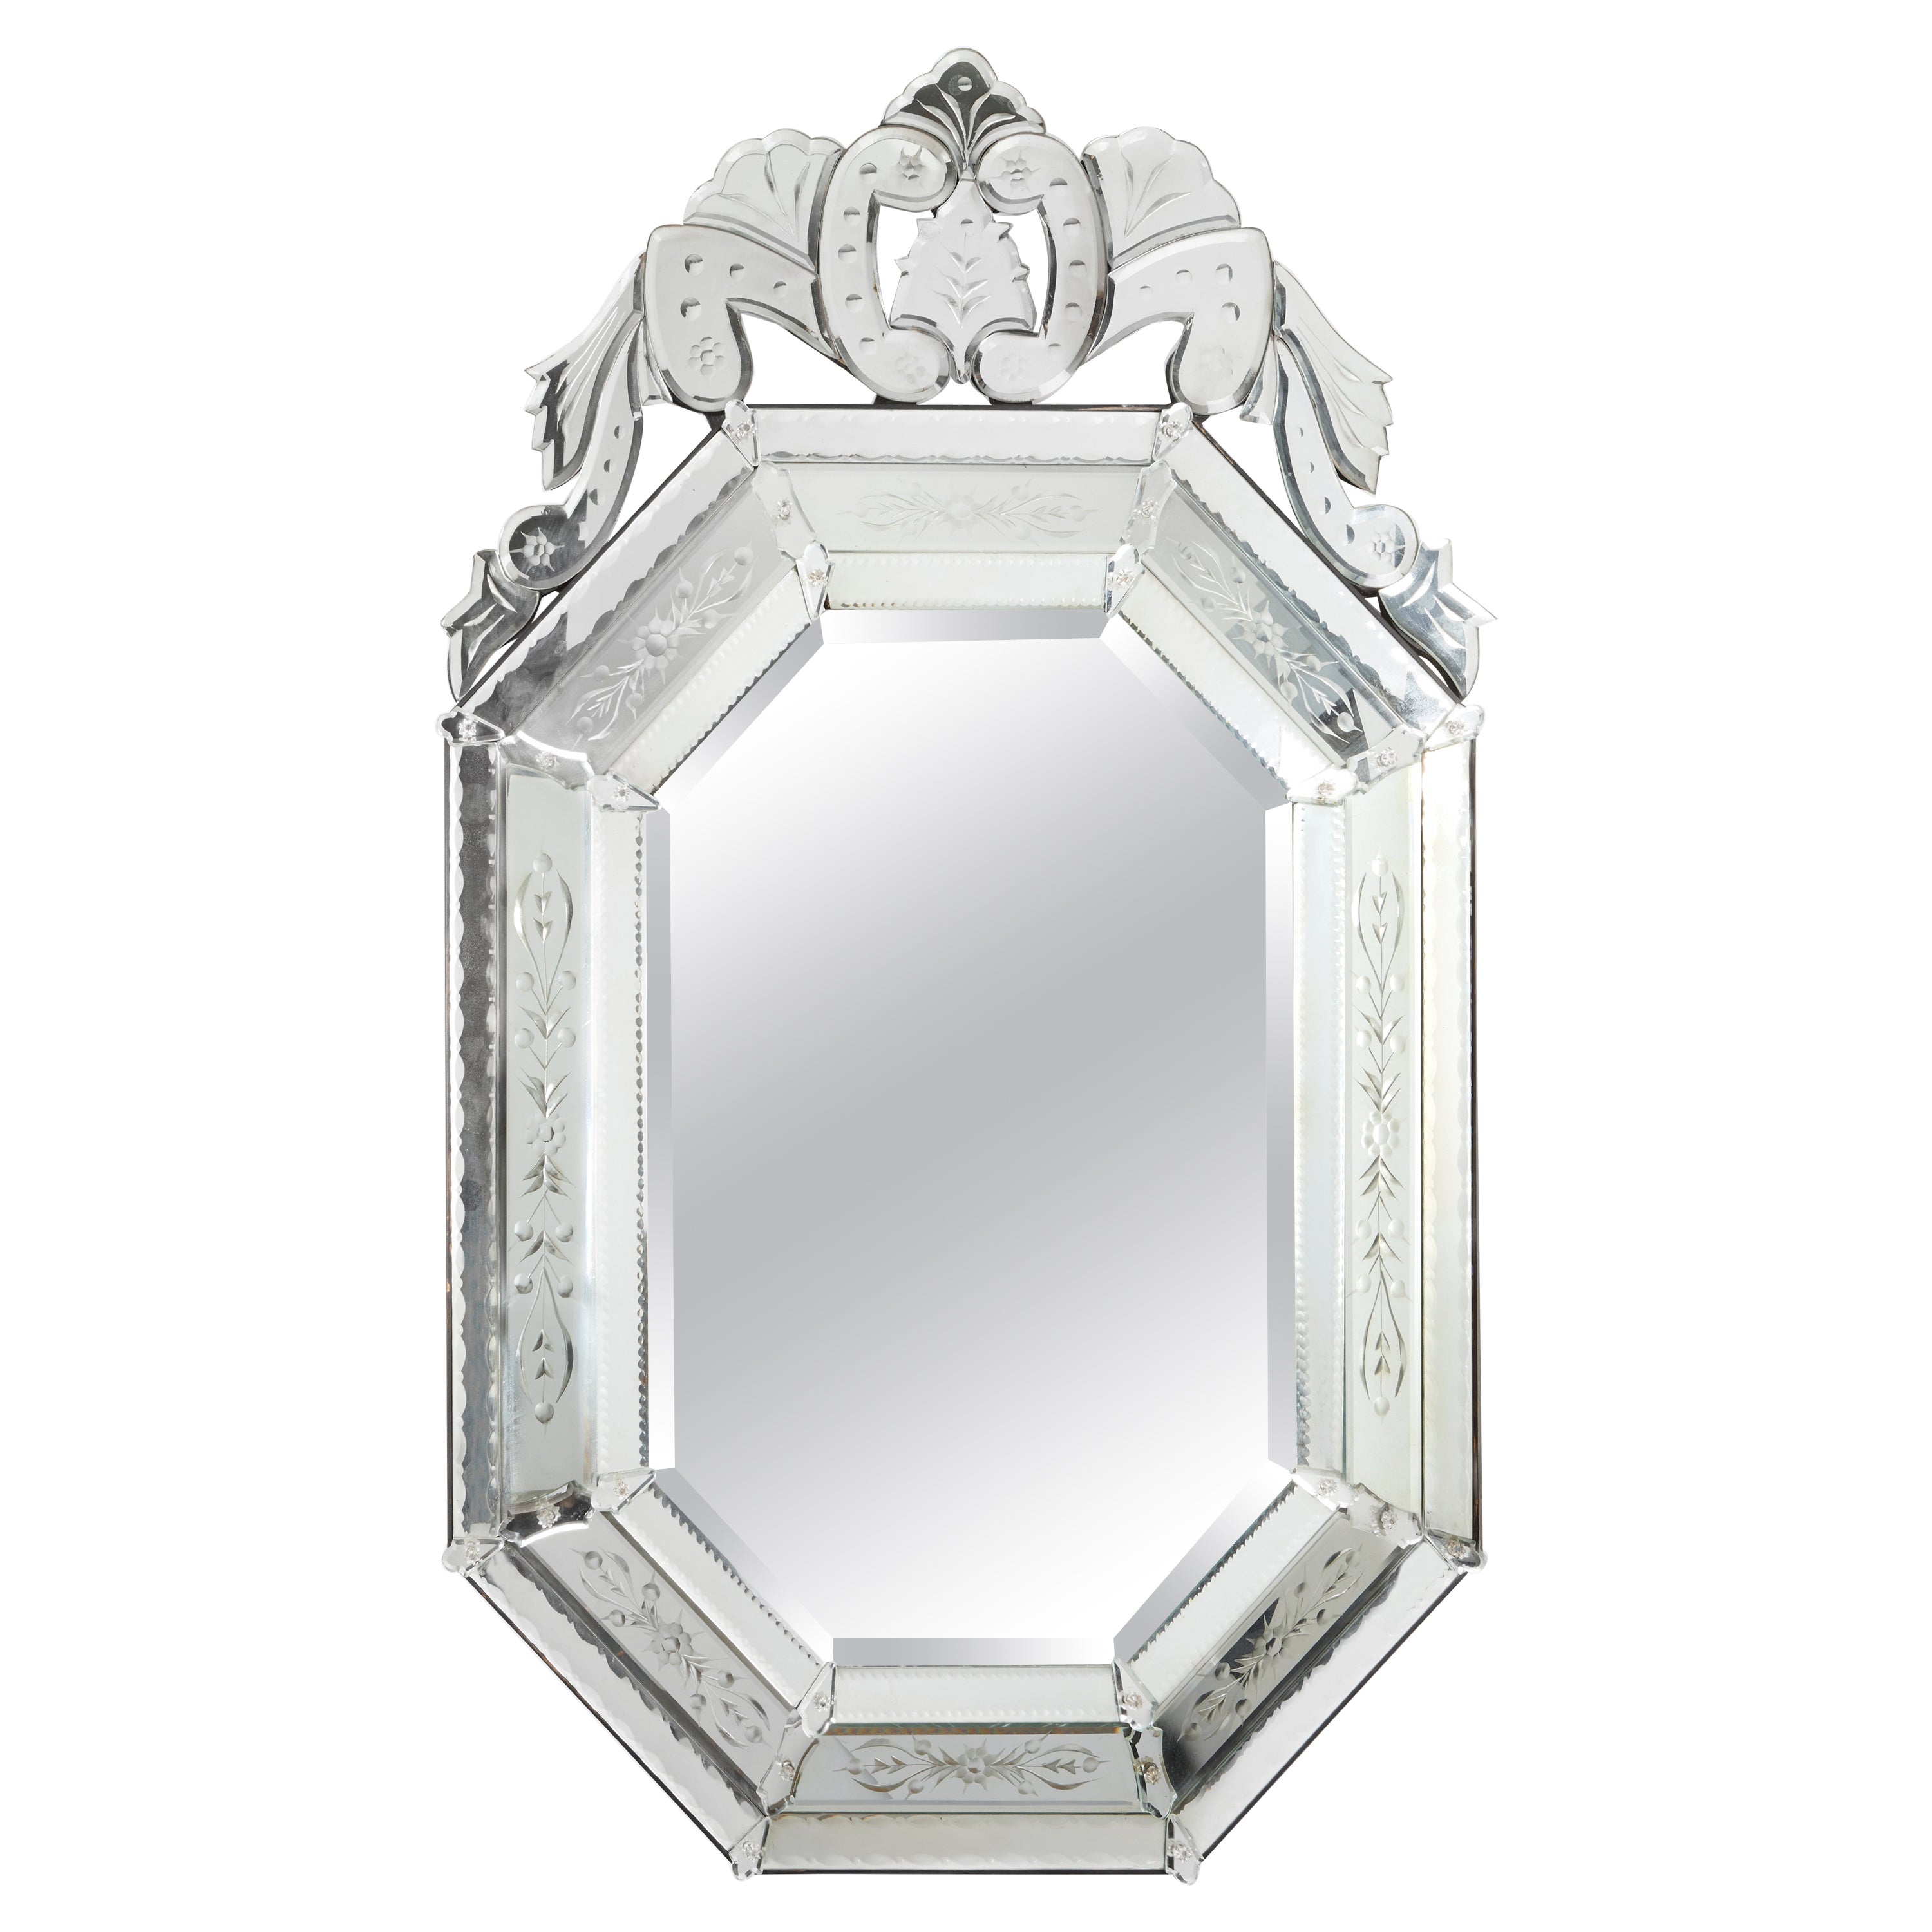 Octagonal Venetian Mirror with a Crest Top For Sale